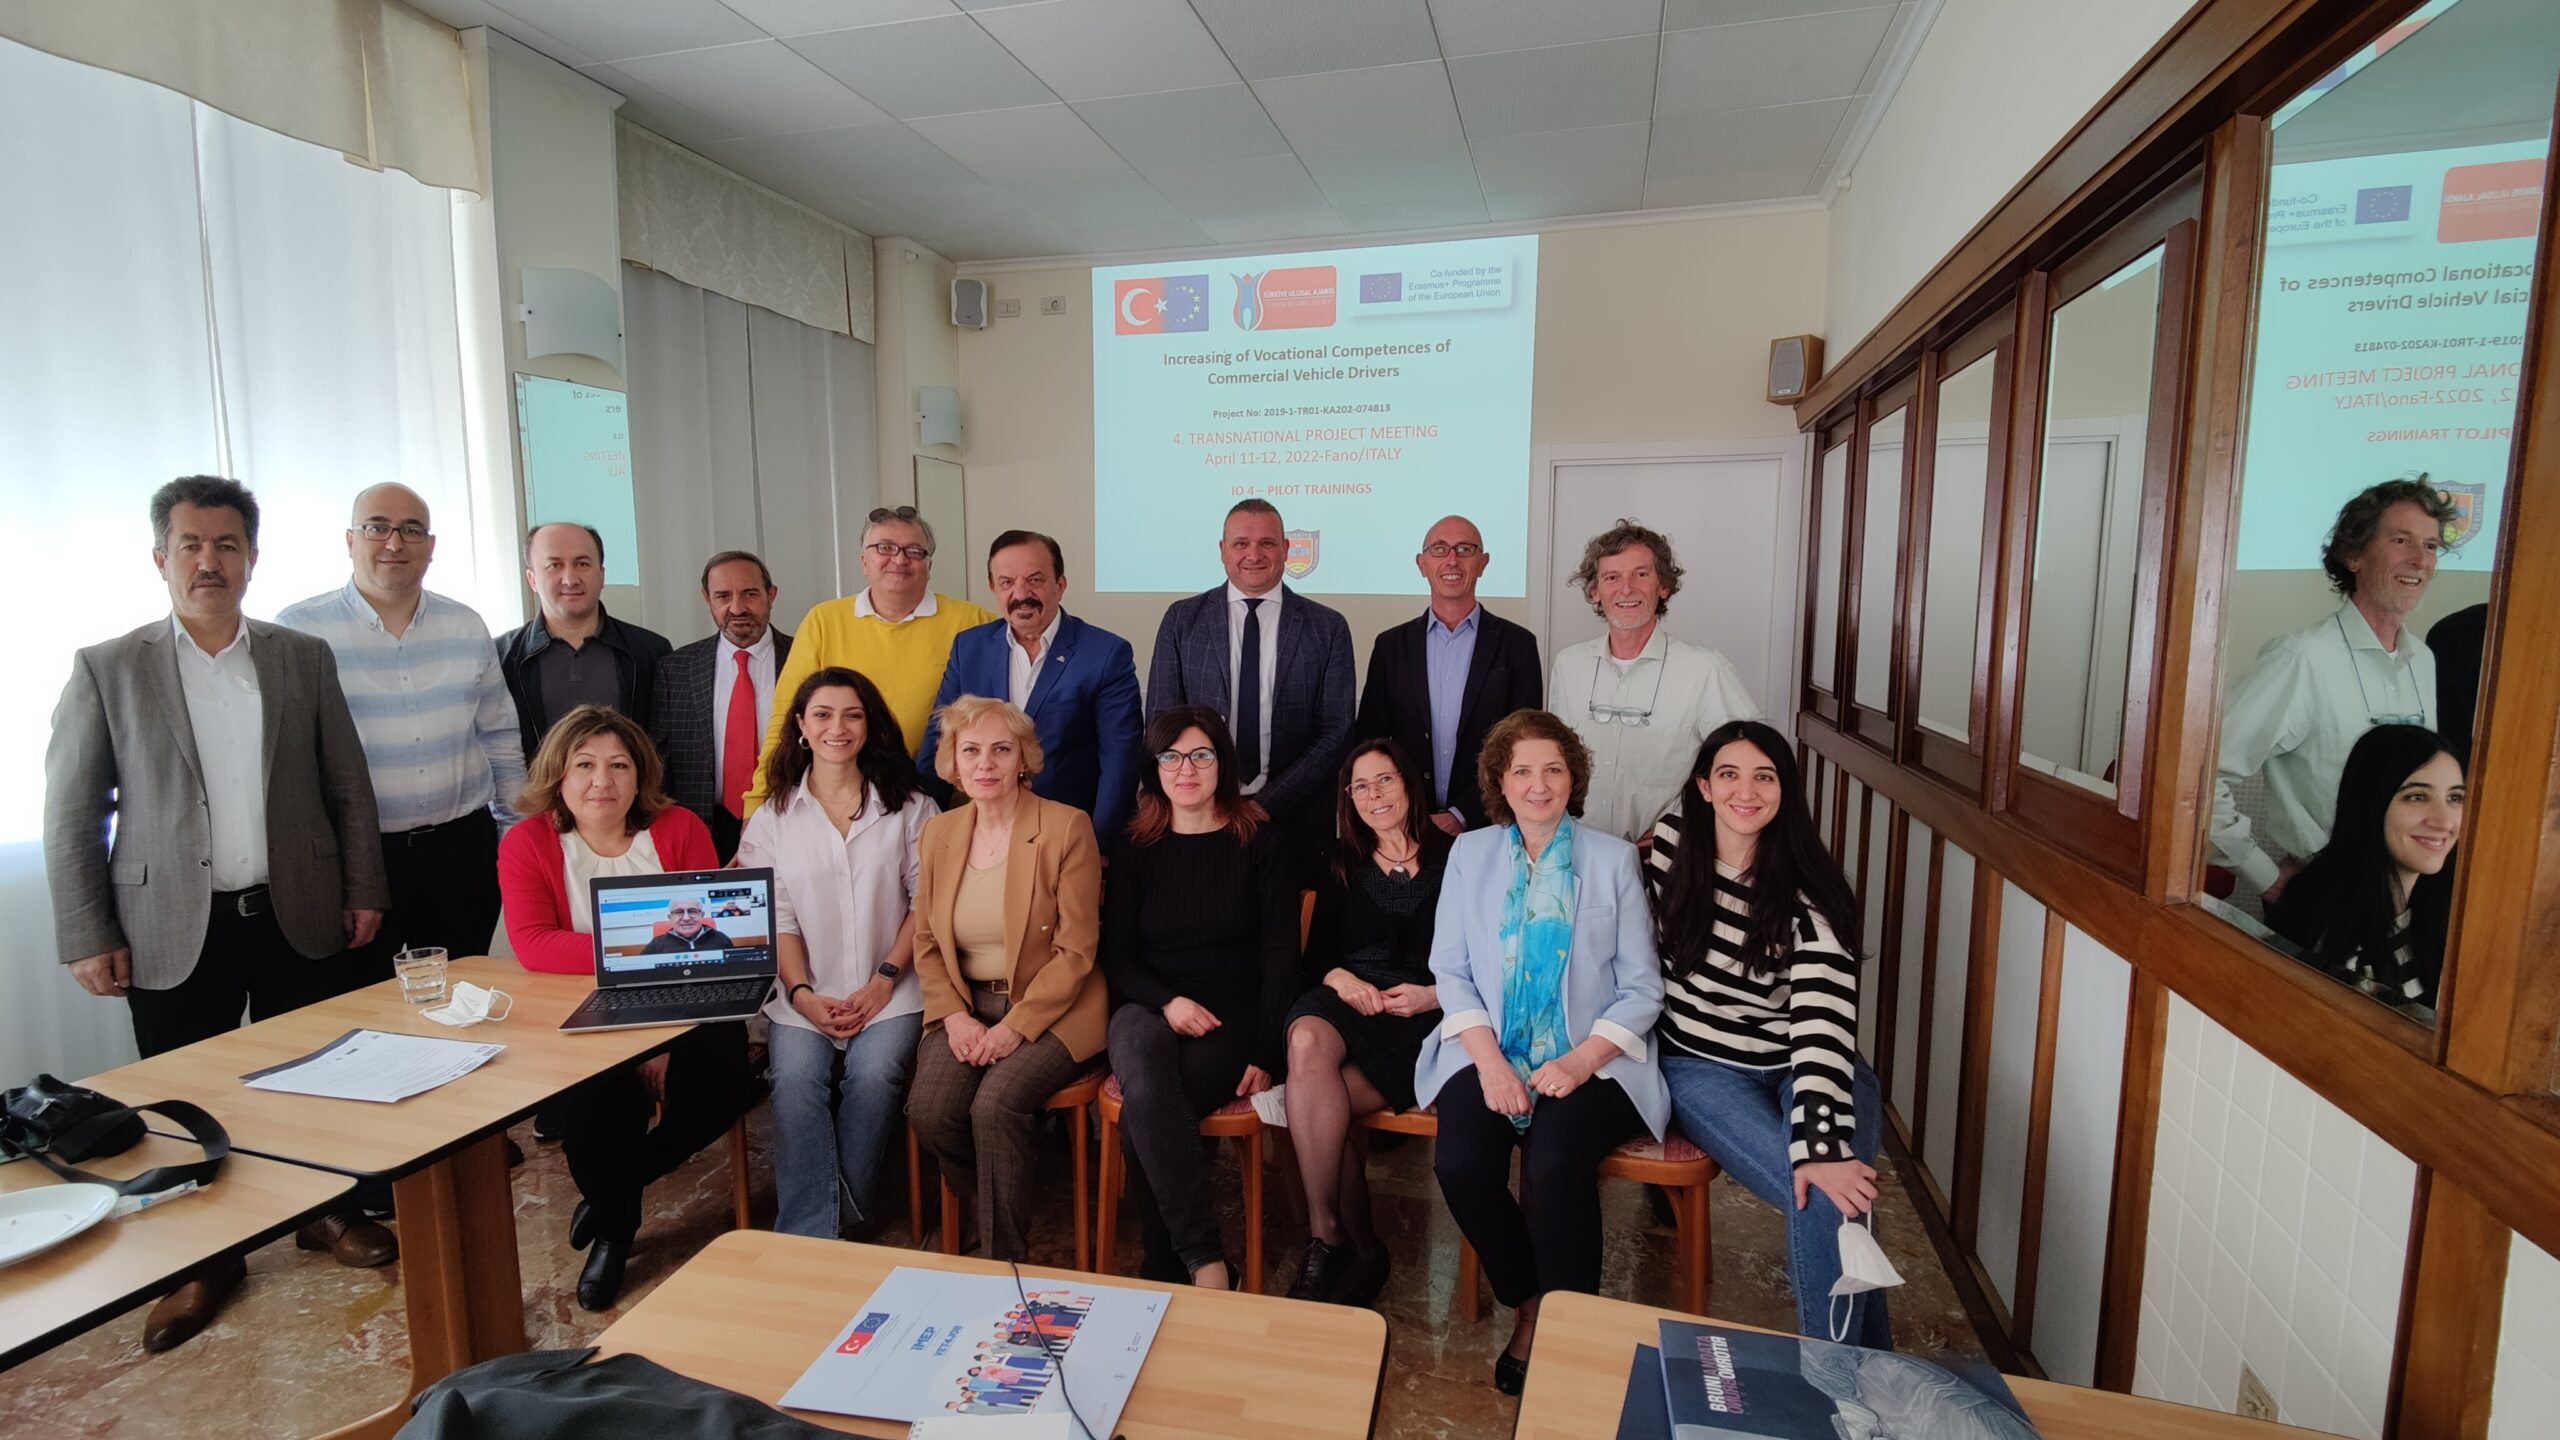 THE 4TH TRANSNATIONAL PROJECT MEETING OF “THE PROJECT FOR INCREASING THE PROFESSIONAL QUALIFICATIONS OF COMMERCIAL VEHICLE DRIVERS” WAS HELD IN FANO, ITALY, ON 11-12 APRIL 2022